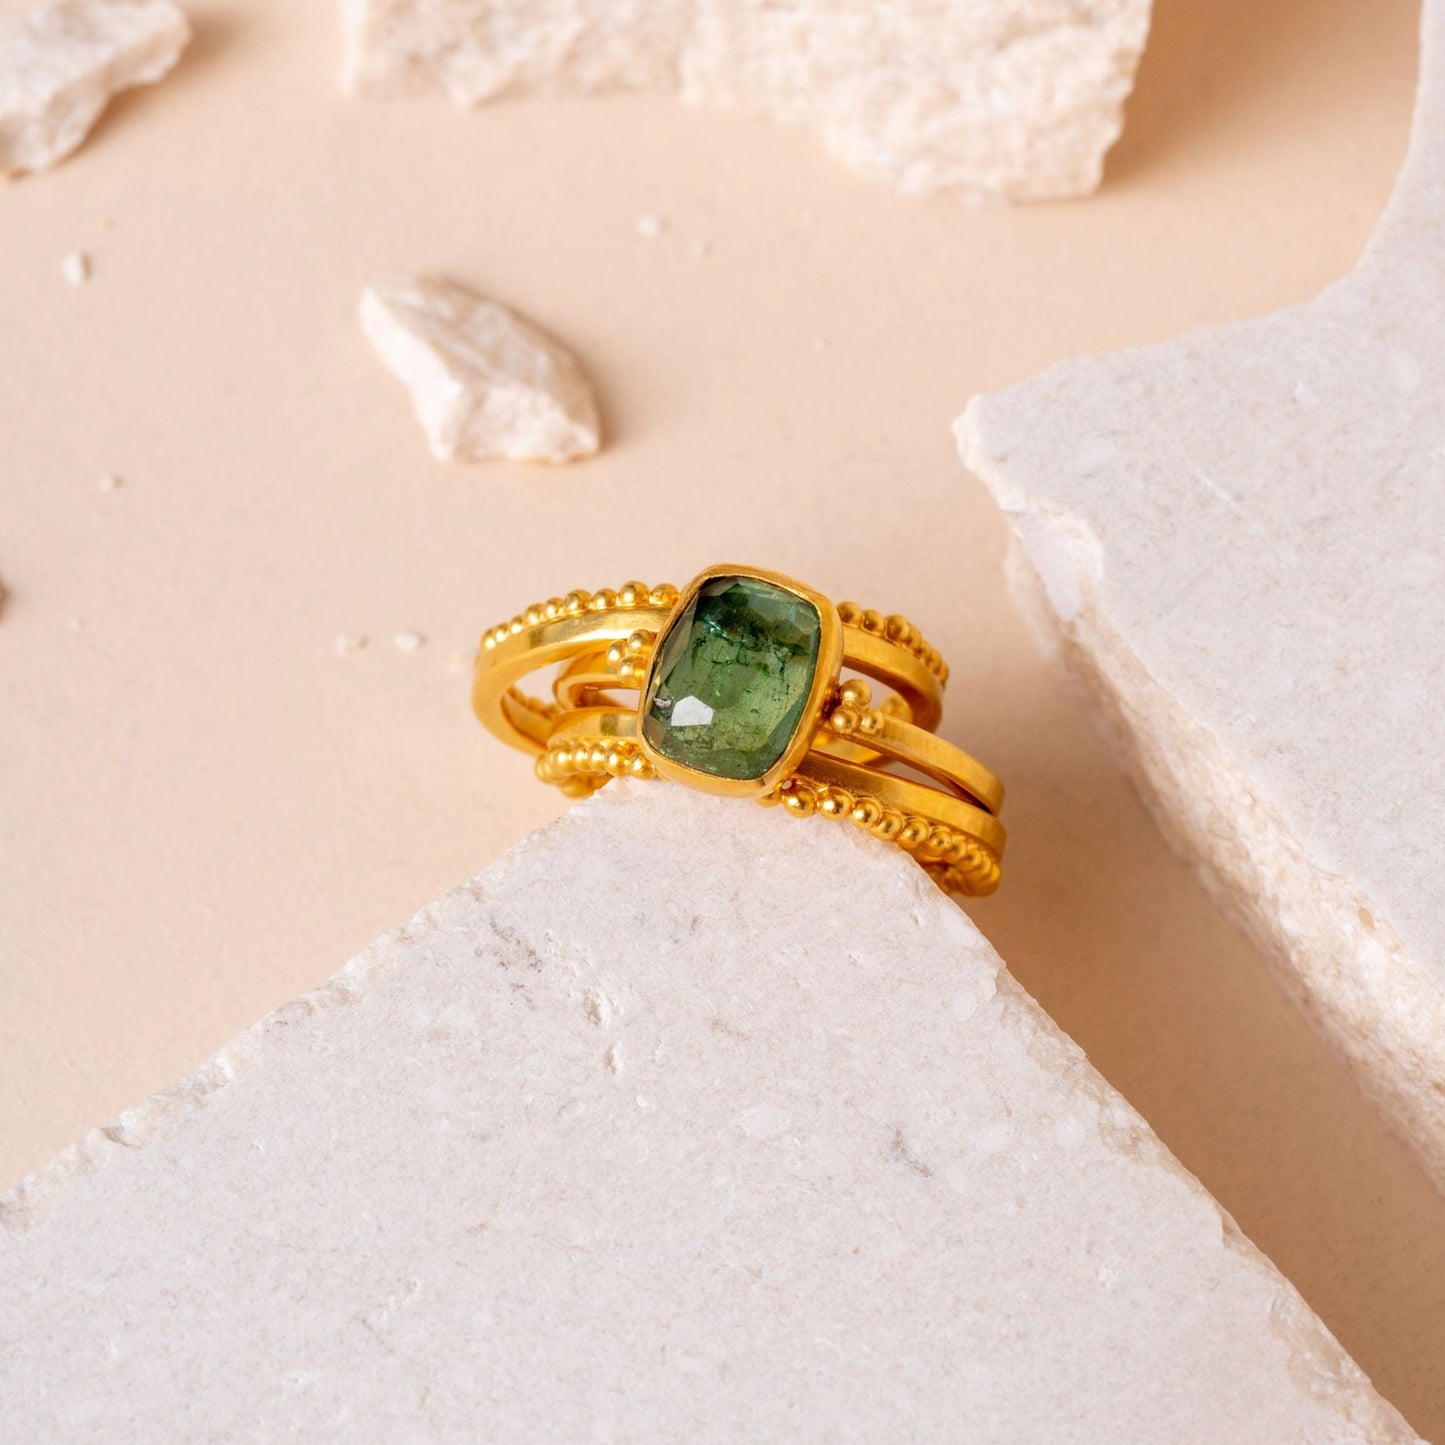 A stunning arrangement of handcrafted gold rings, distinguished by fine granulation work and enriched with the beauty of forest green tourmaline gemstones.